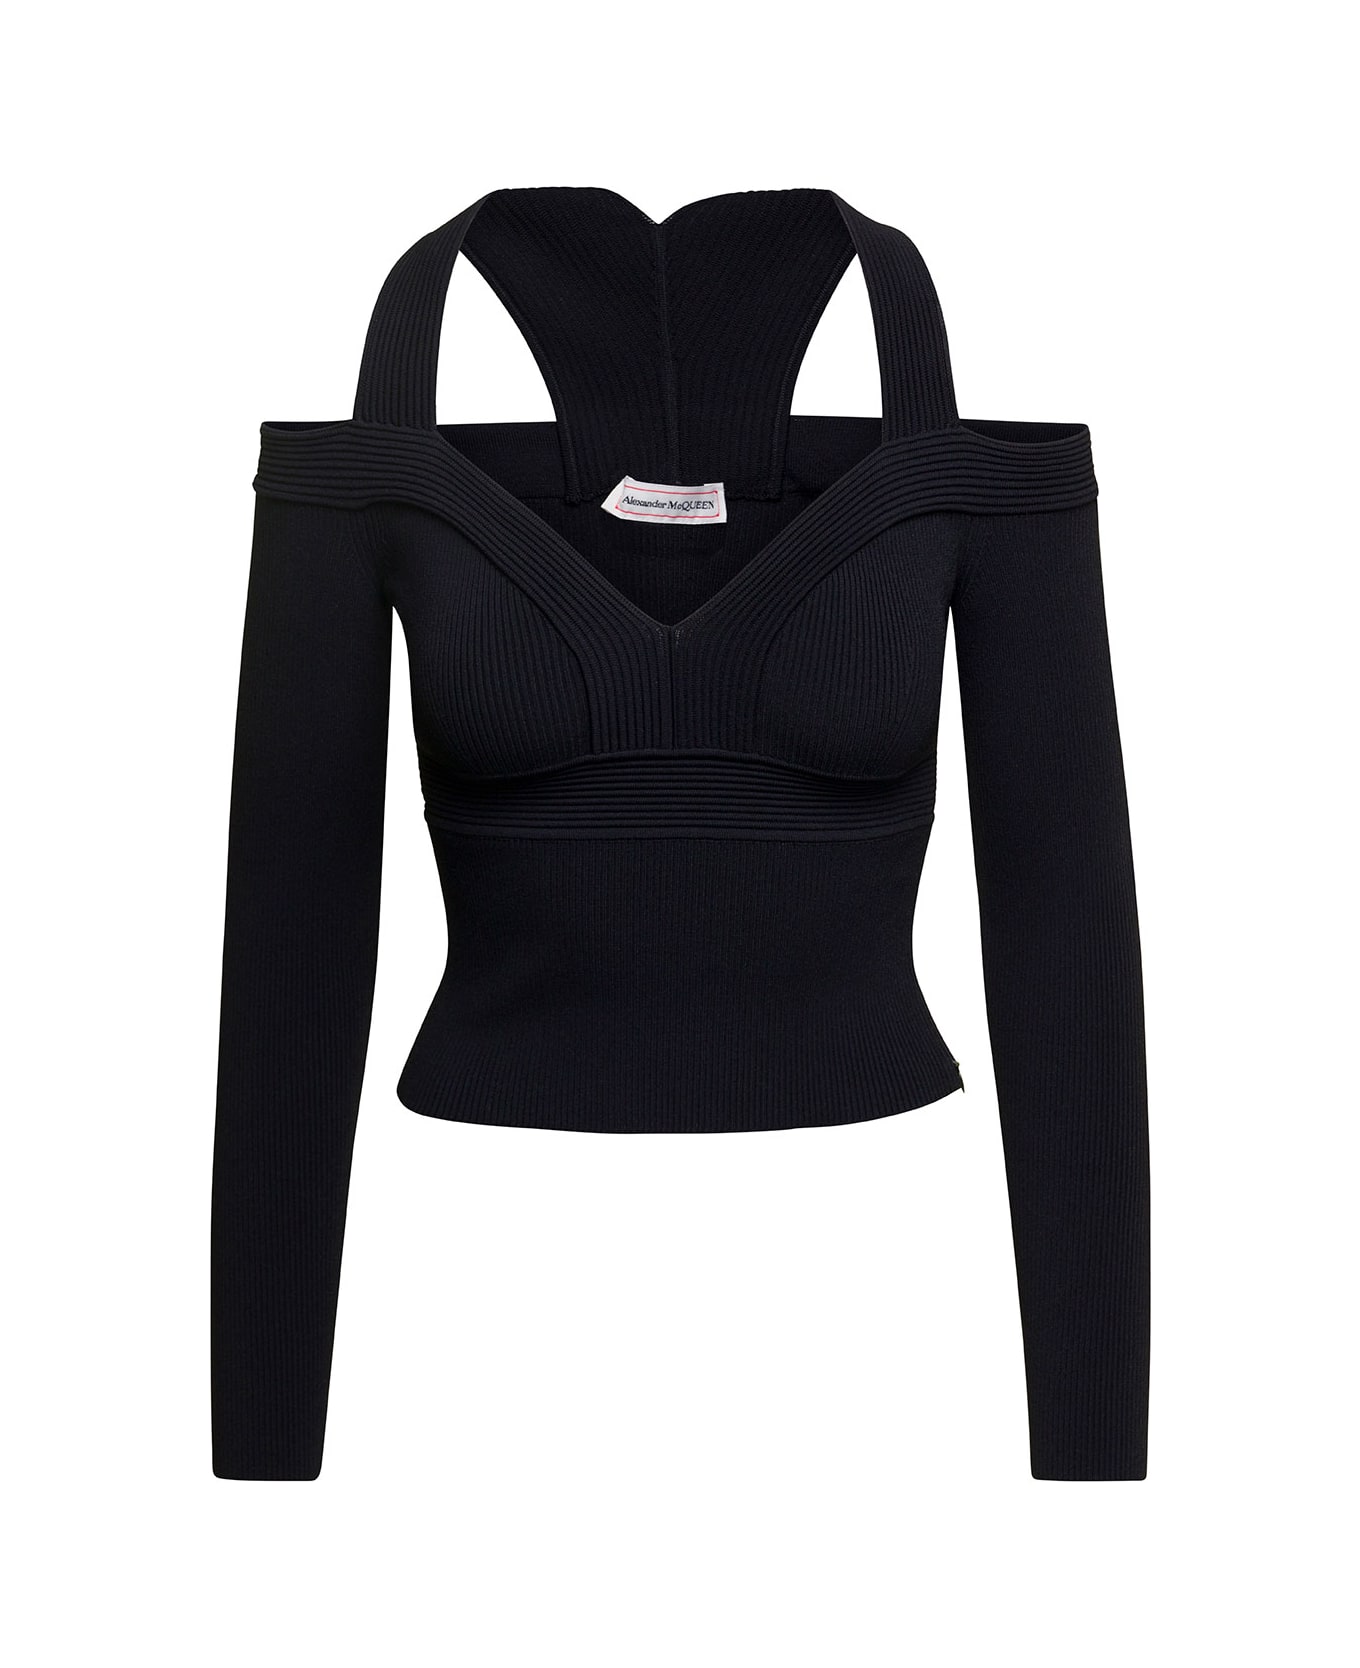 Alexander McQueen Cropped Top With Cut-out Details - Black